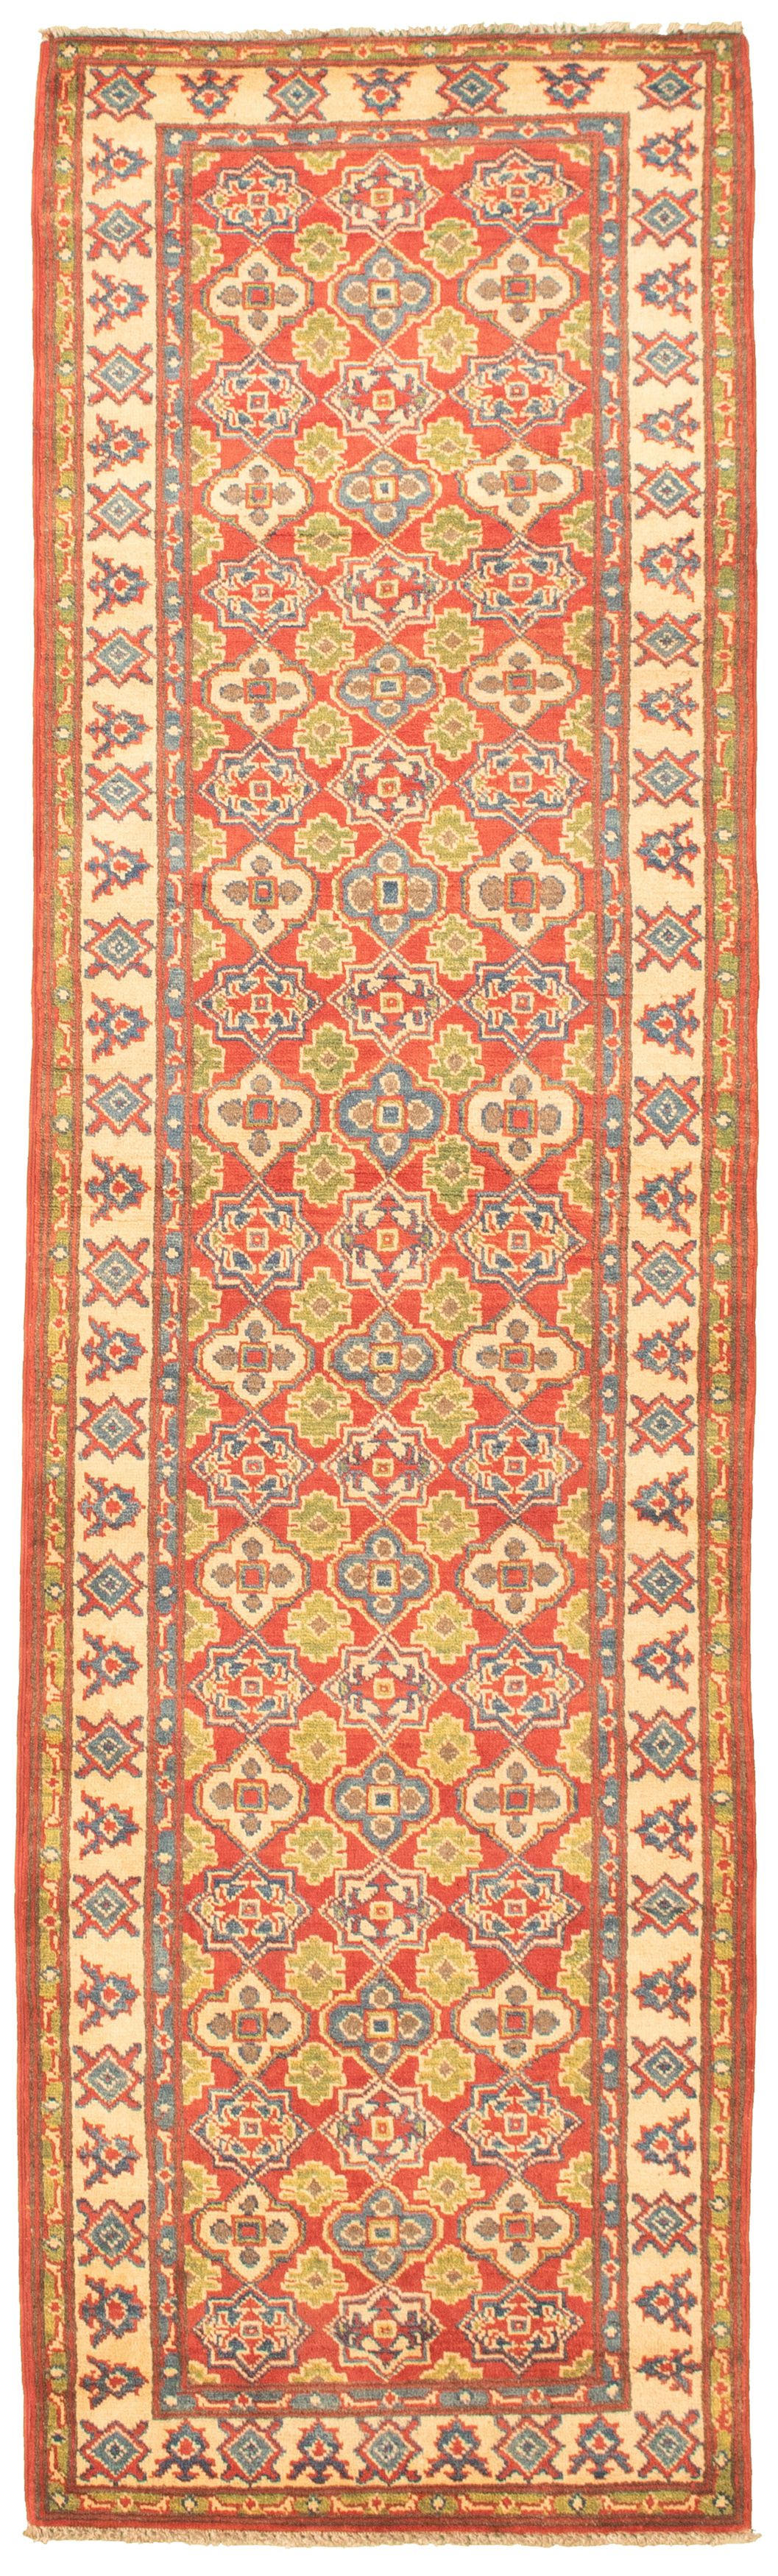 Hand-knotted Finest Gazni Red Wool Rug 2'8" x 9'5"  Size: 2'7" x 9'5"  